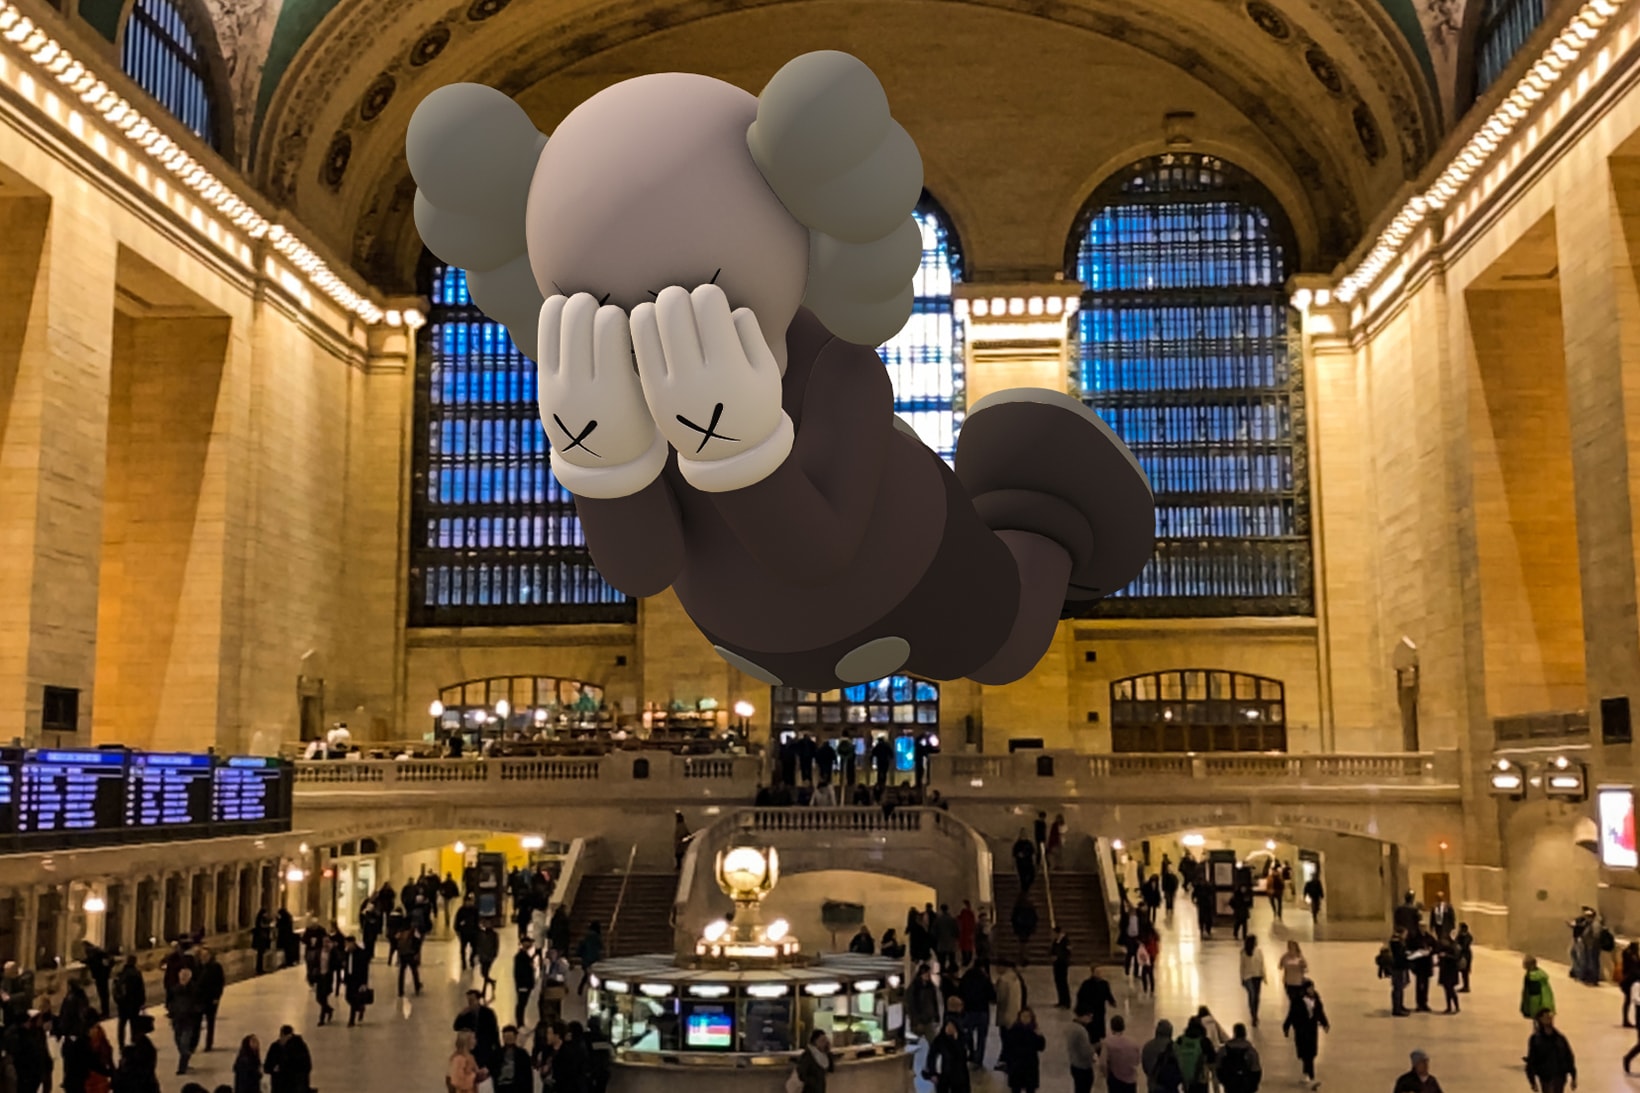 kaws companion brian donnelly acute art app collaboration expanded holiday augmented reality sculptures exhibition new york paris